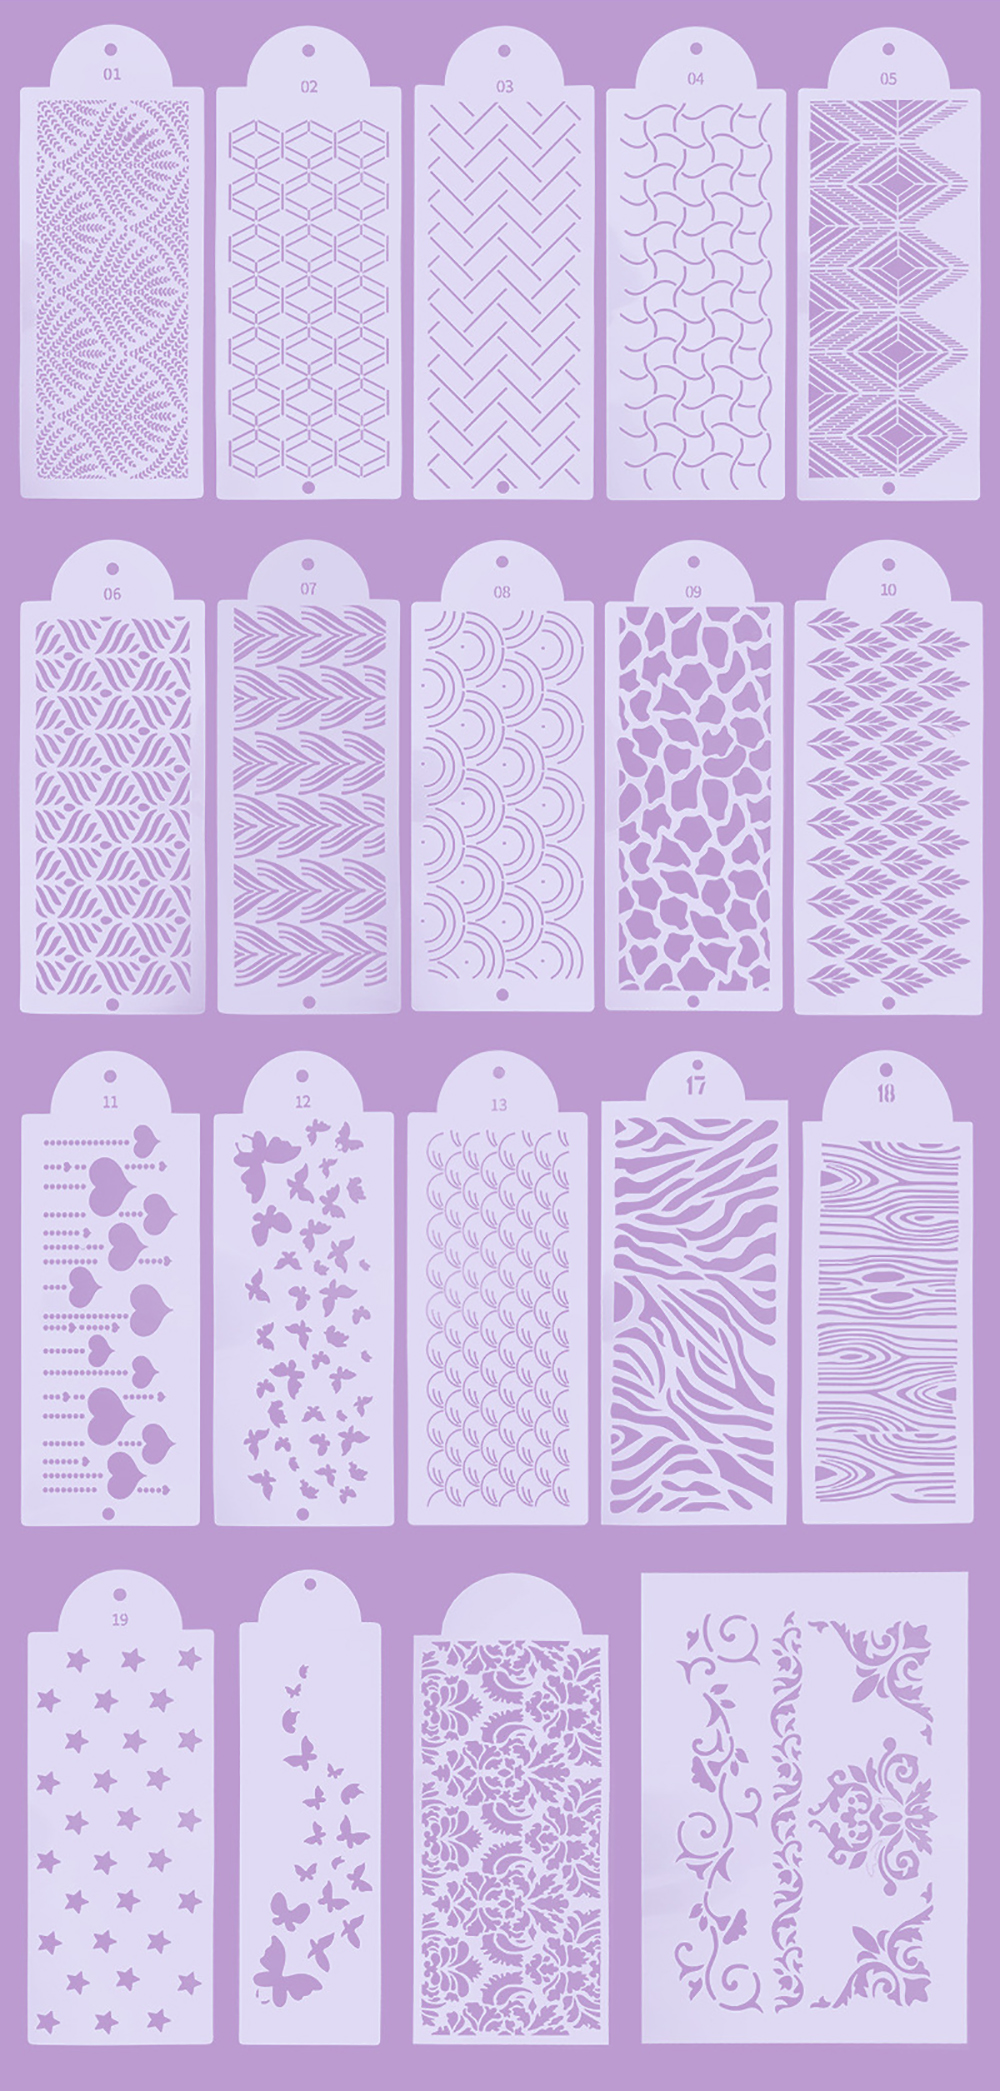 Cake Mesh Stamps Stencils for Wedding Cake